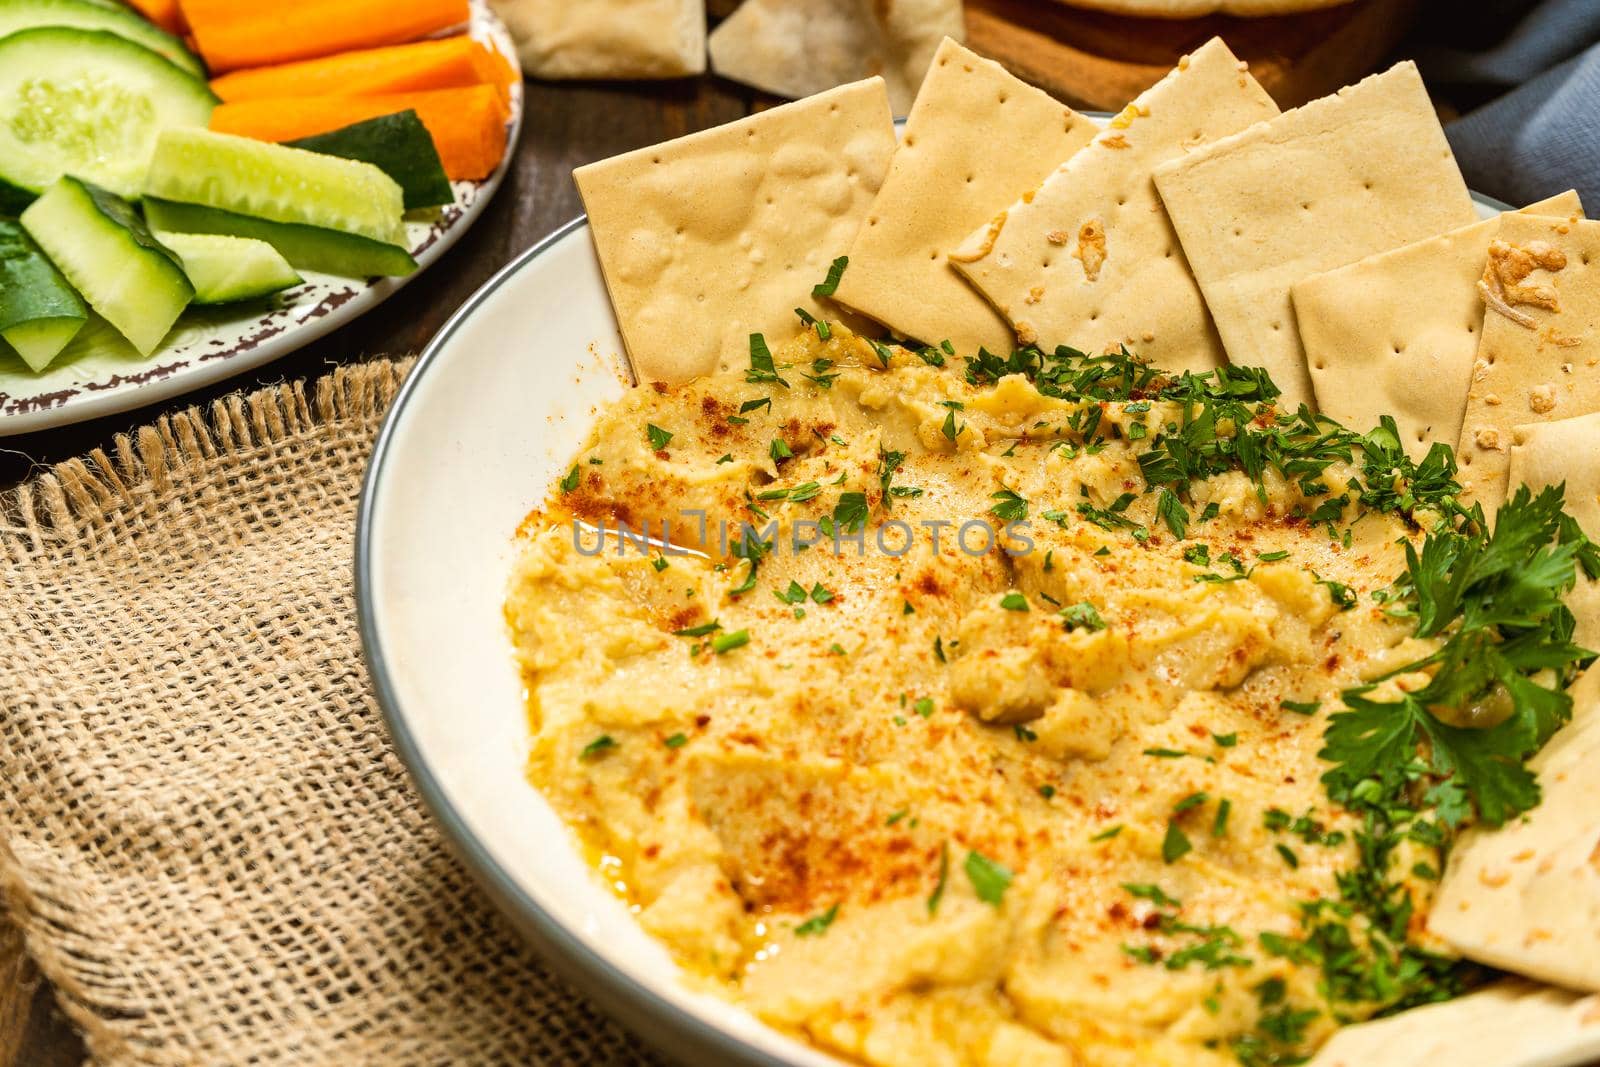 Close-up of a bowl with homemade Hummus with crackers and in another bowl carrots and other vegetables. Fresh, healthy and natural food concept.